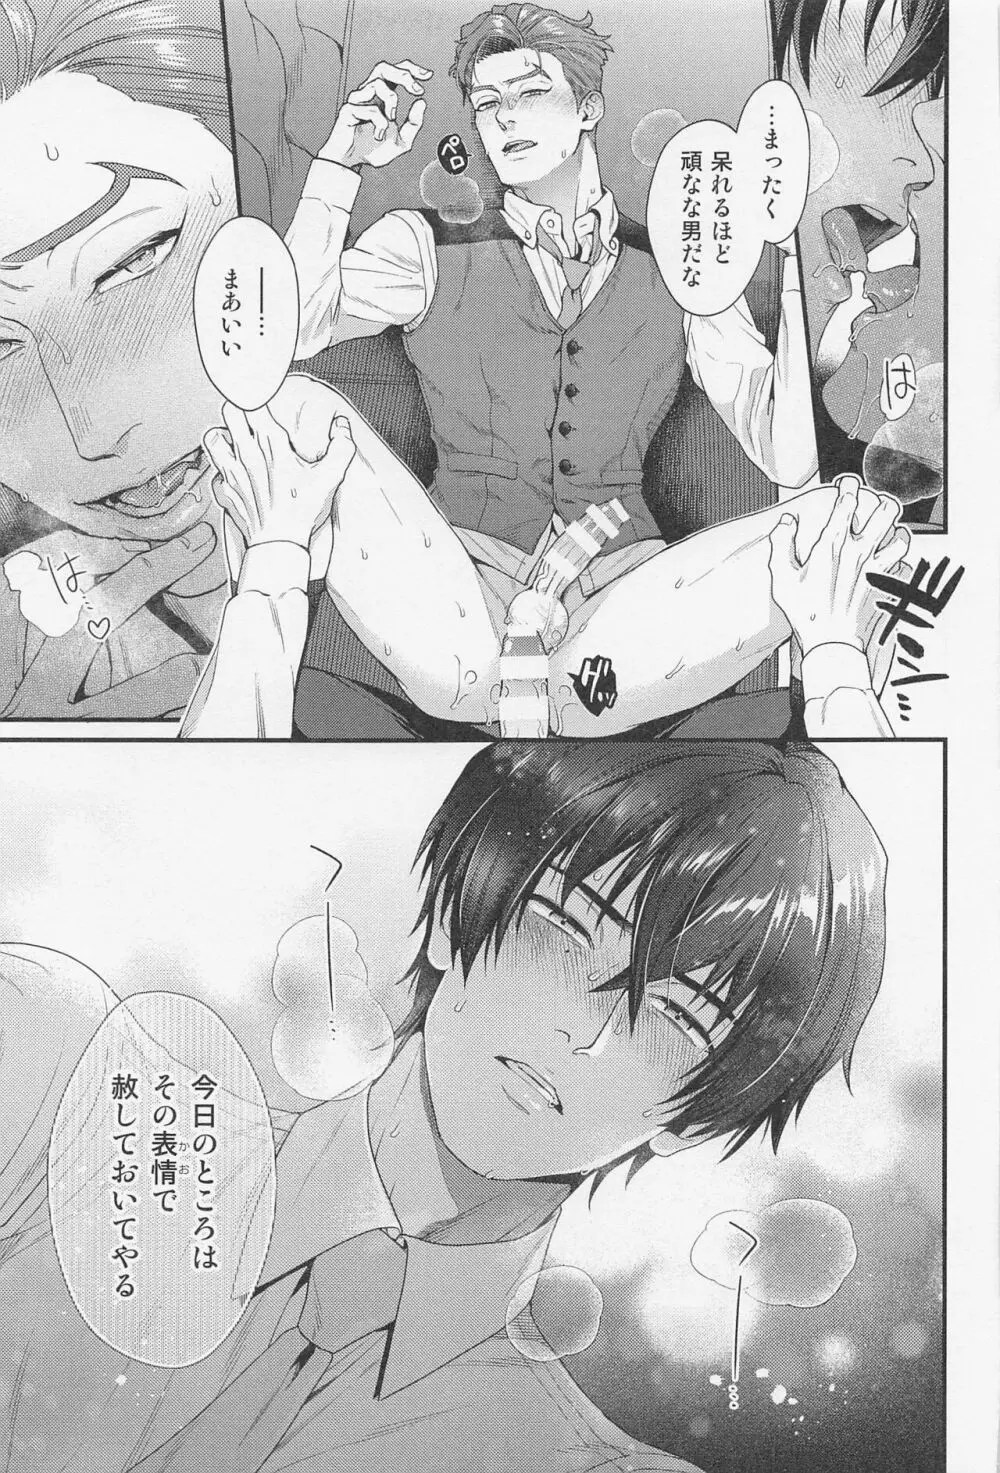 LOVE FIXED POINT - 愛の定点観測 - page18